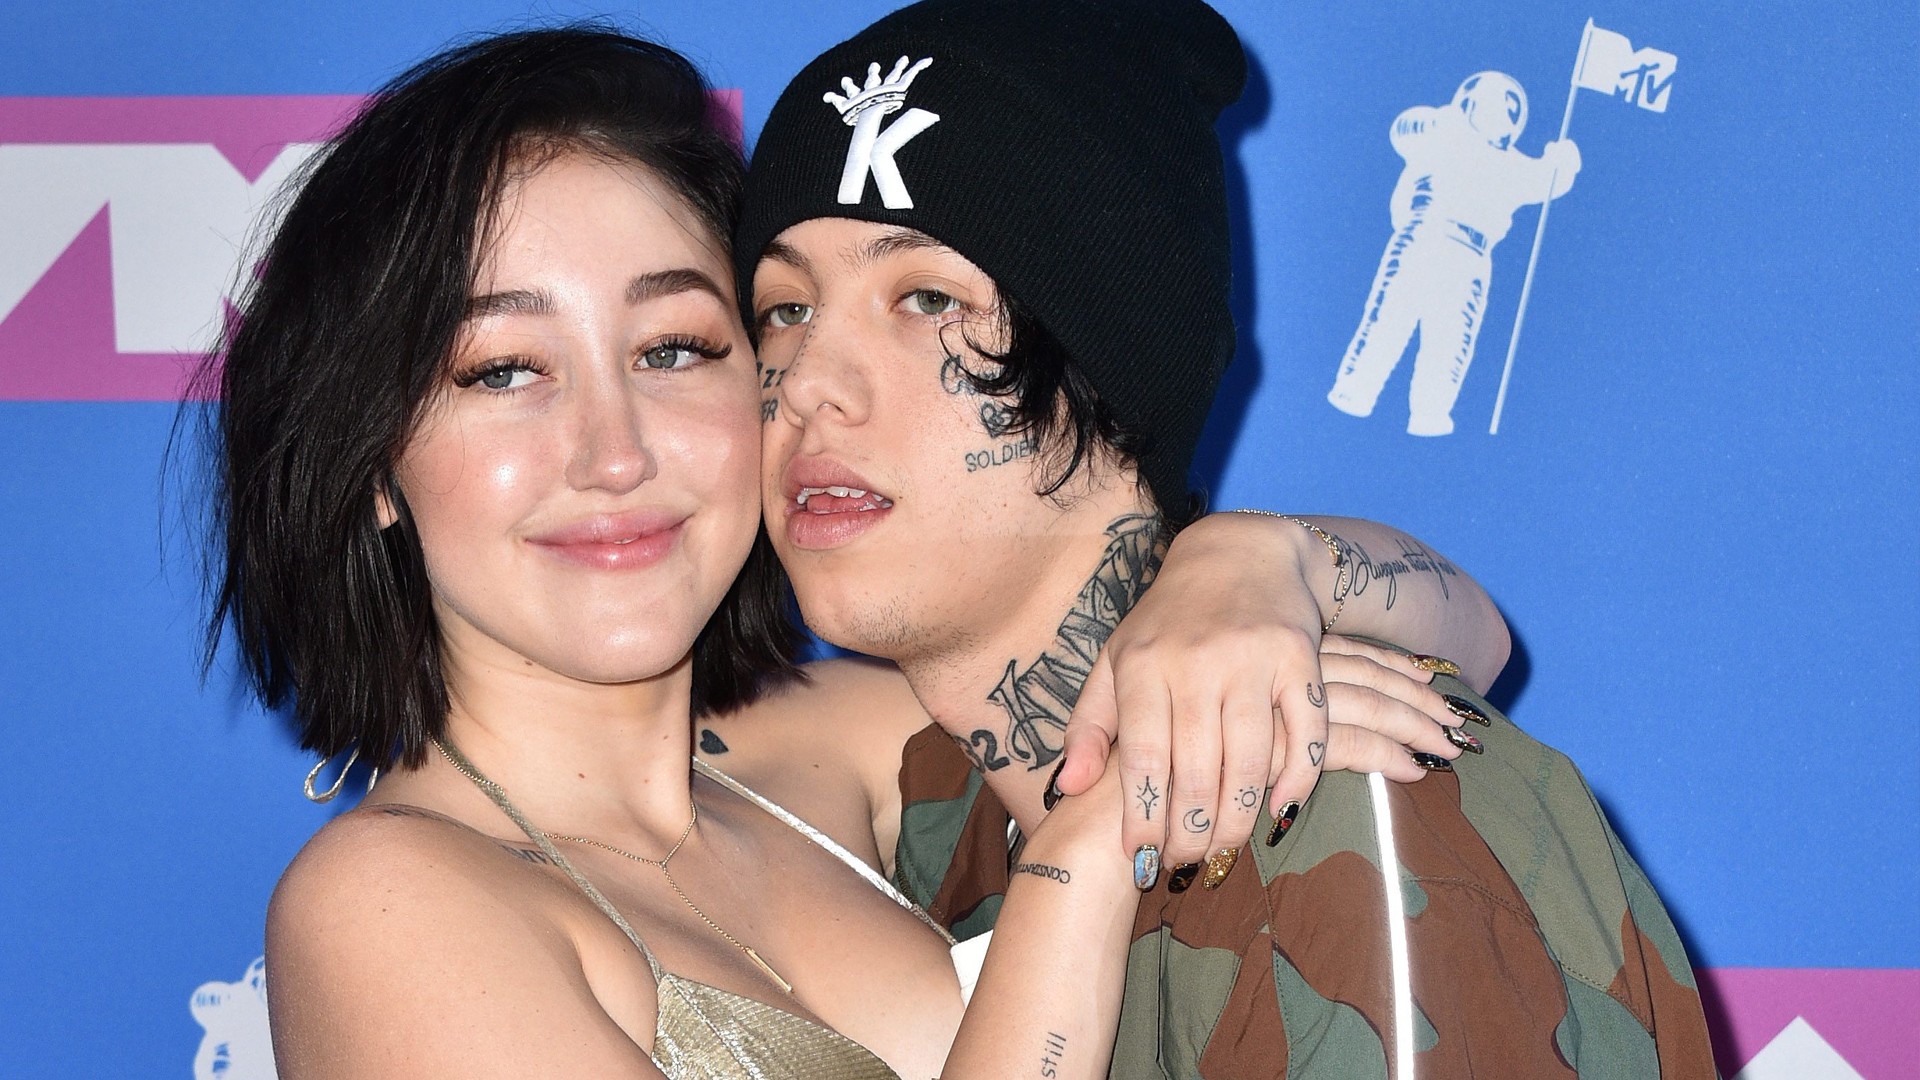 Noah Cyrus and Lil Xan's Breakup Is a Hot Mess and I Can't Look Away